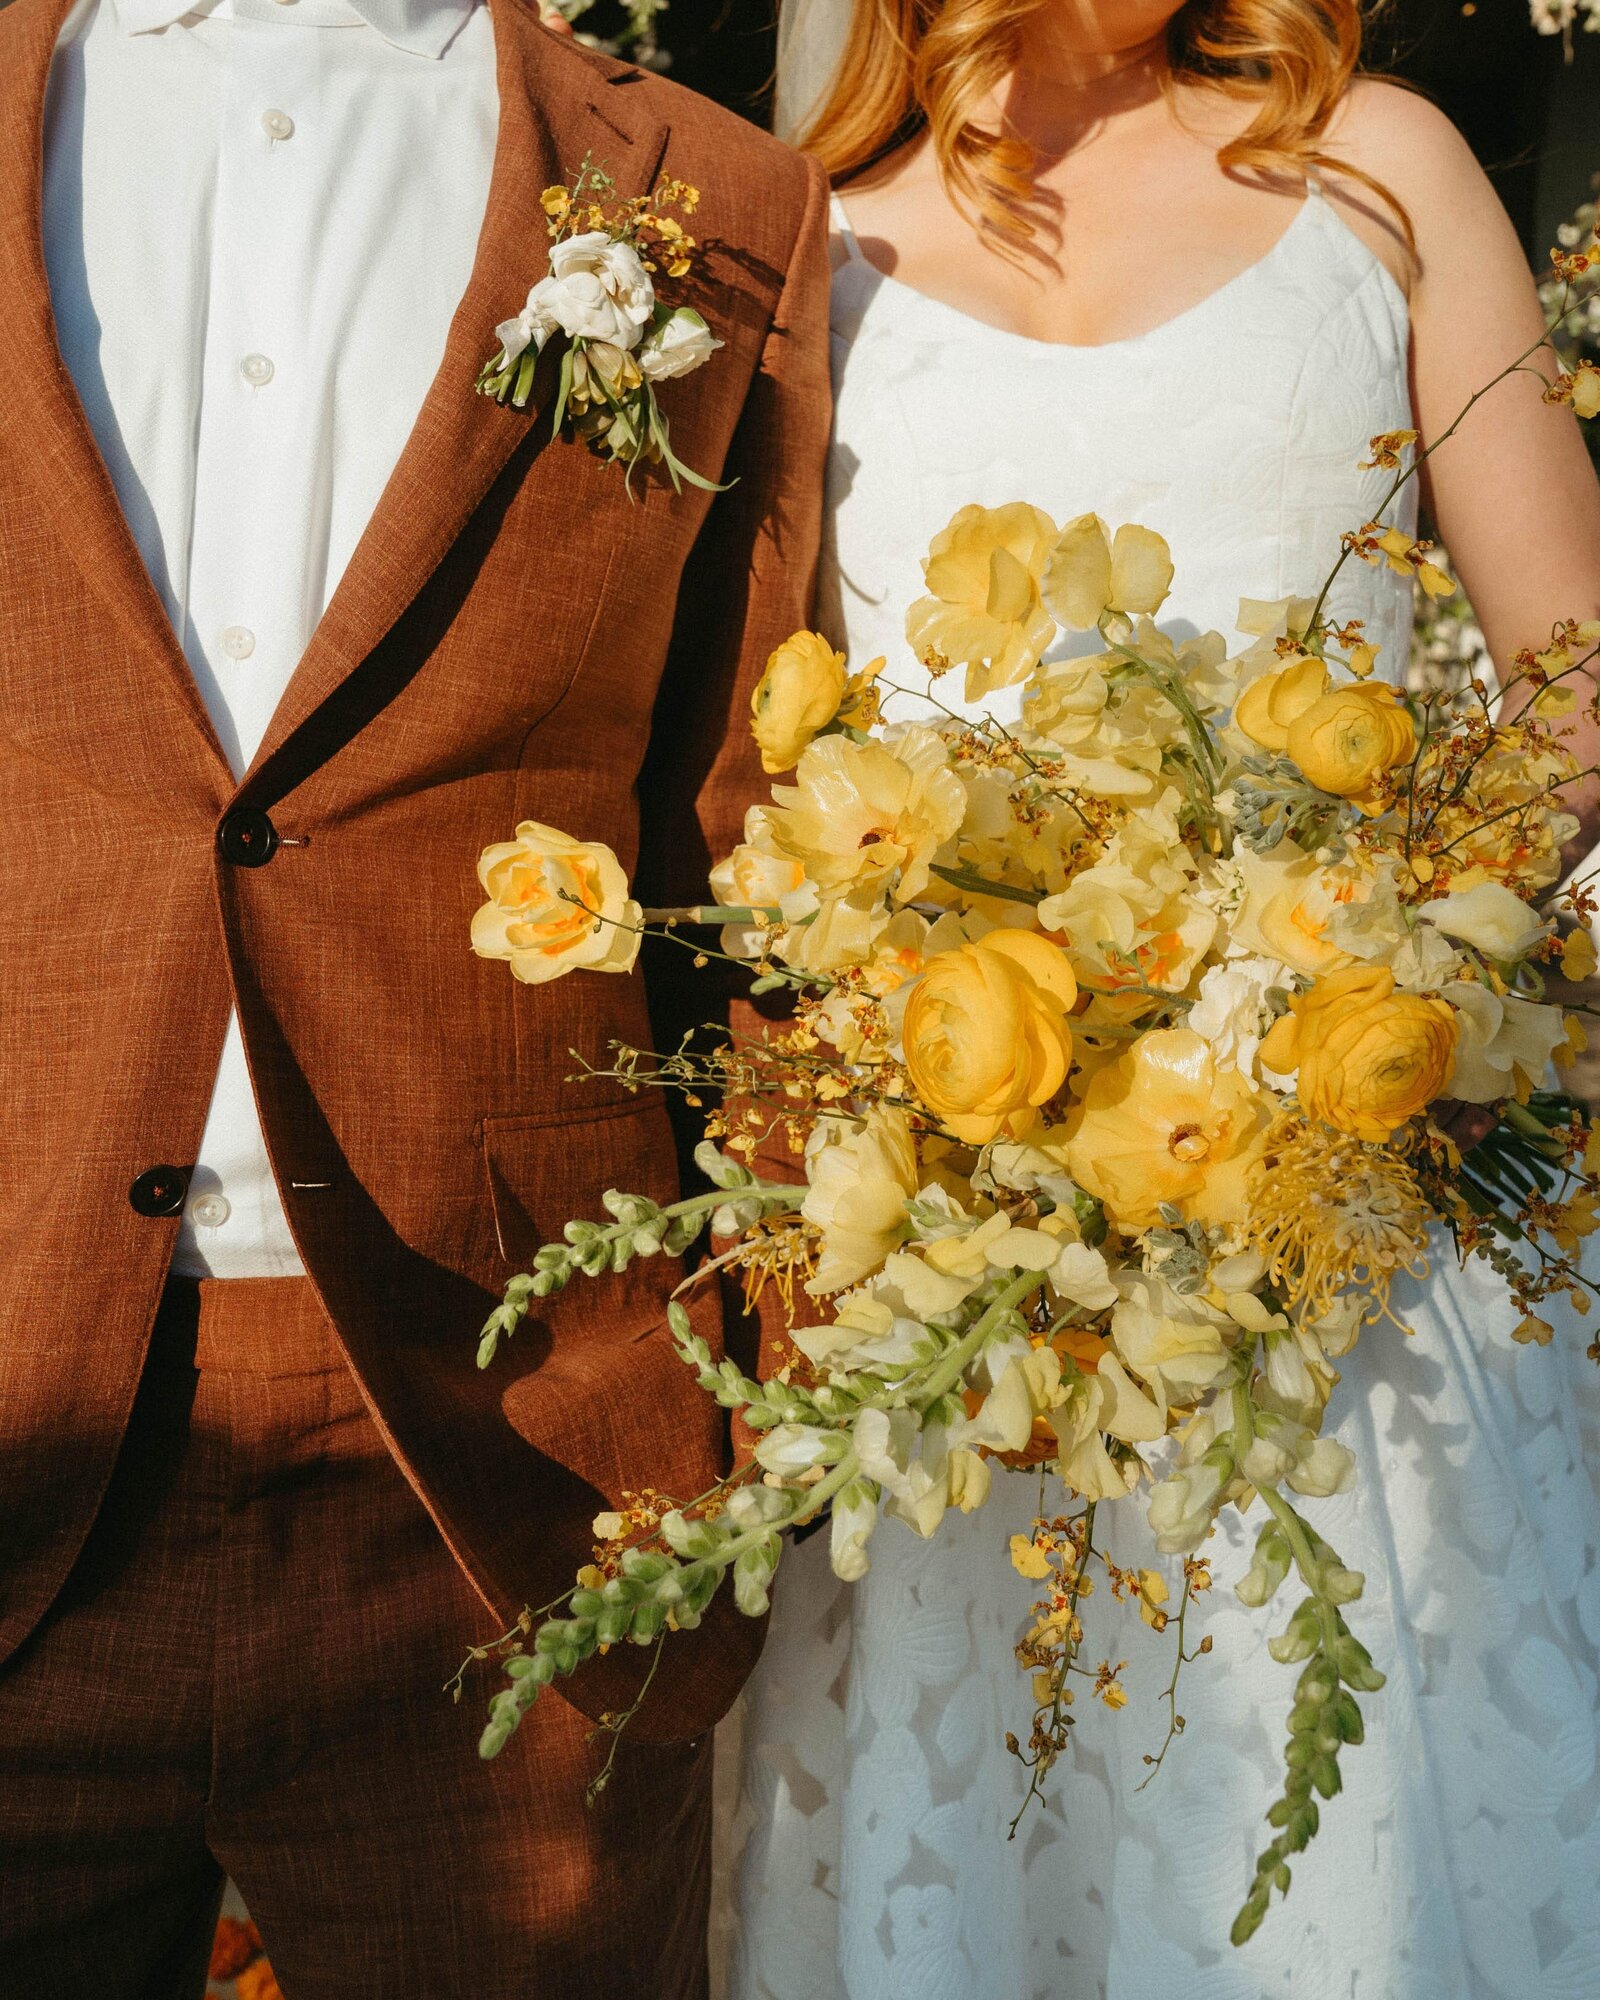 A large, all yellow bouquet is held by a bride next to her groom.